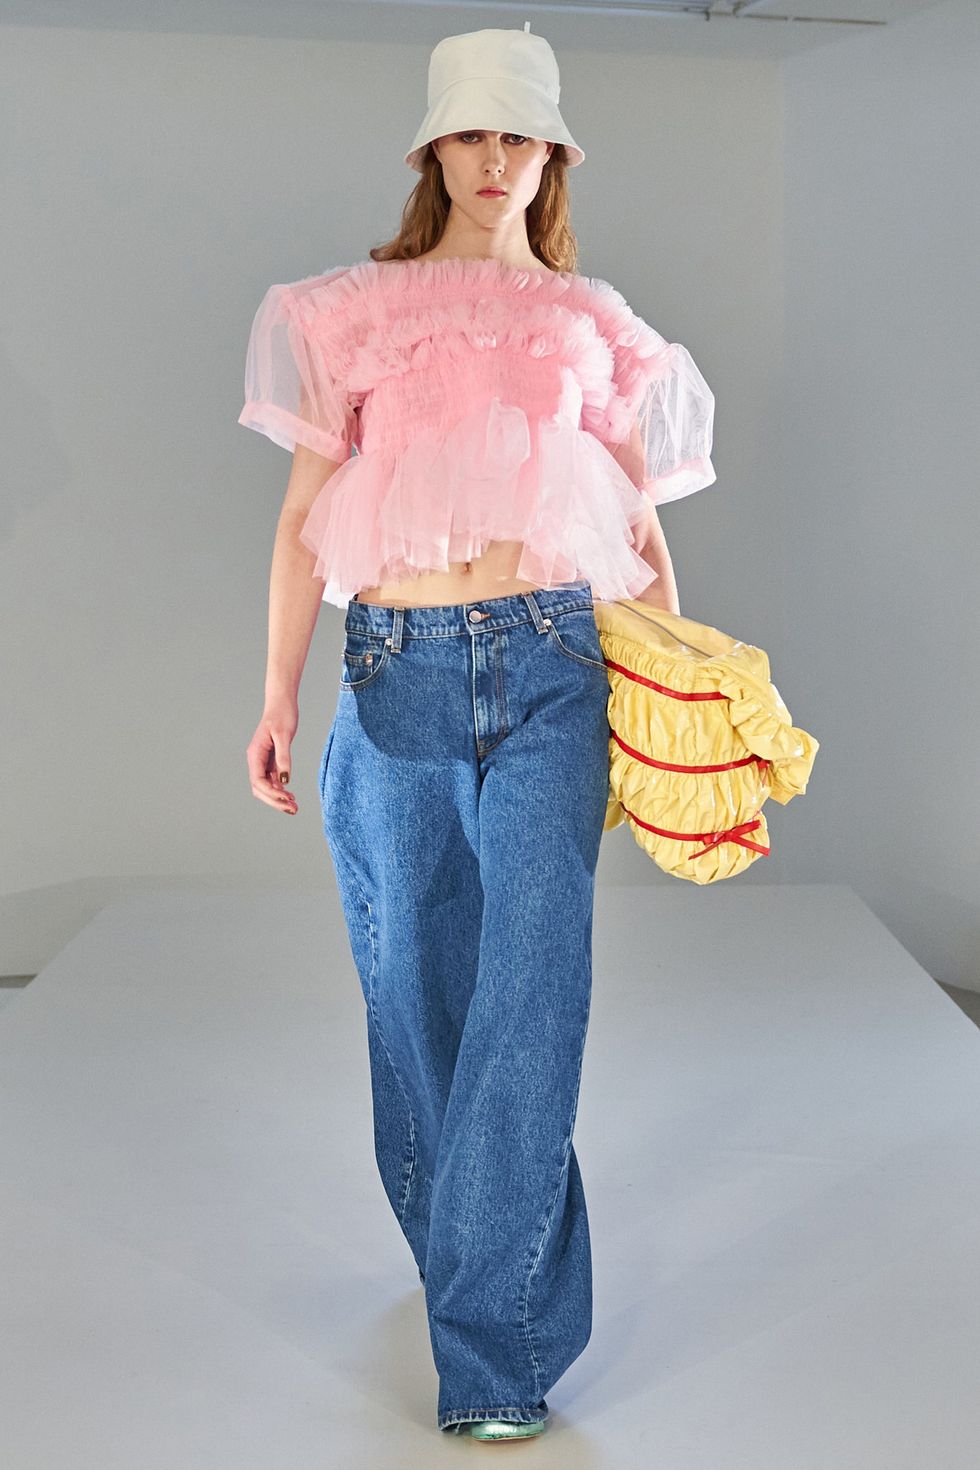 Are you team denim? (LOUIS VUITTON PINK DENIM is coming!!!) 